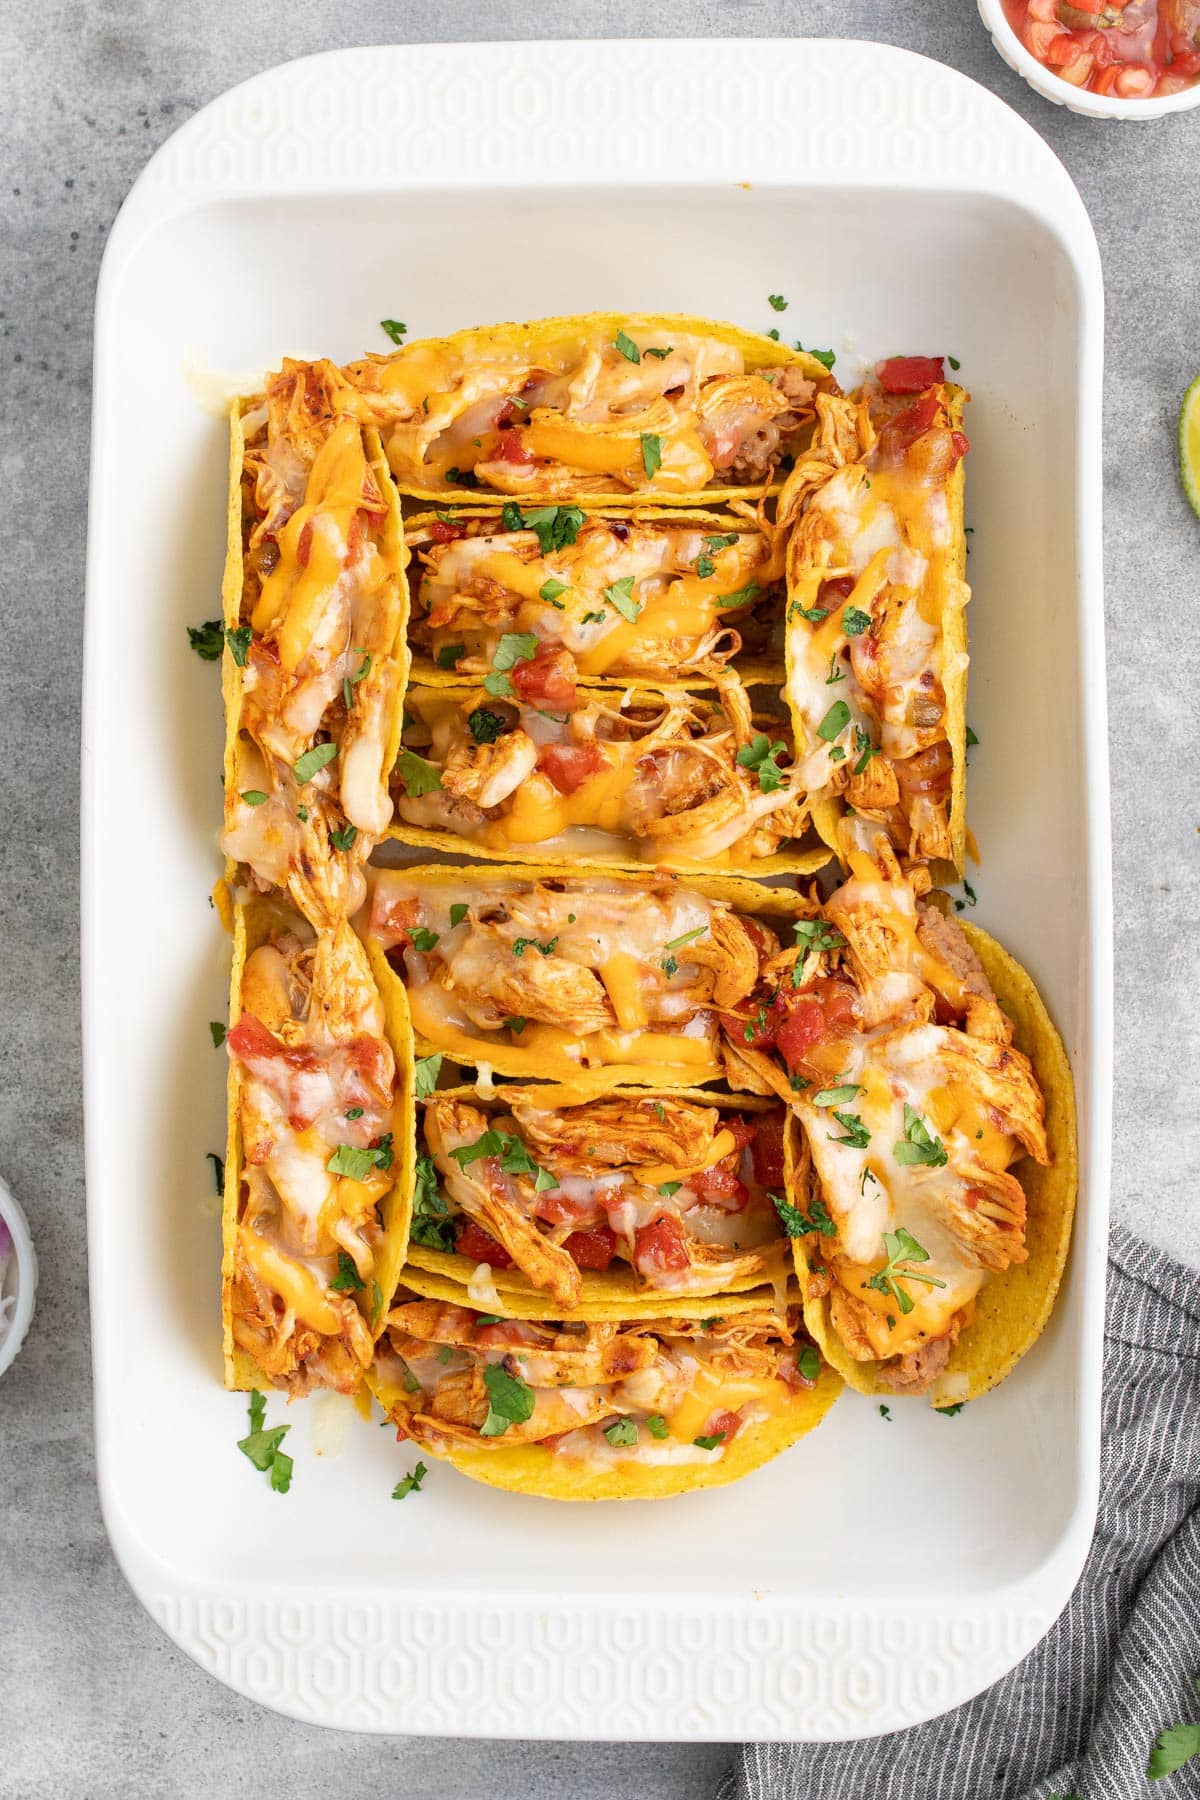 Ten cheesy baked chicken tacos topped with chopped fresh cilantro in a white casserole dish.